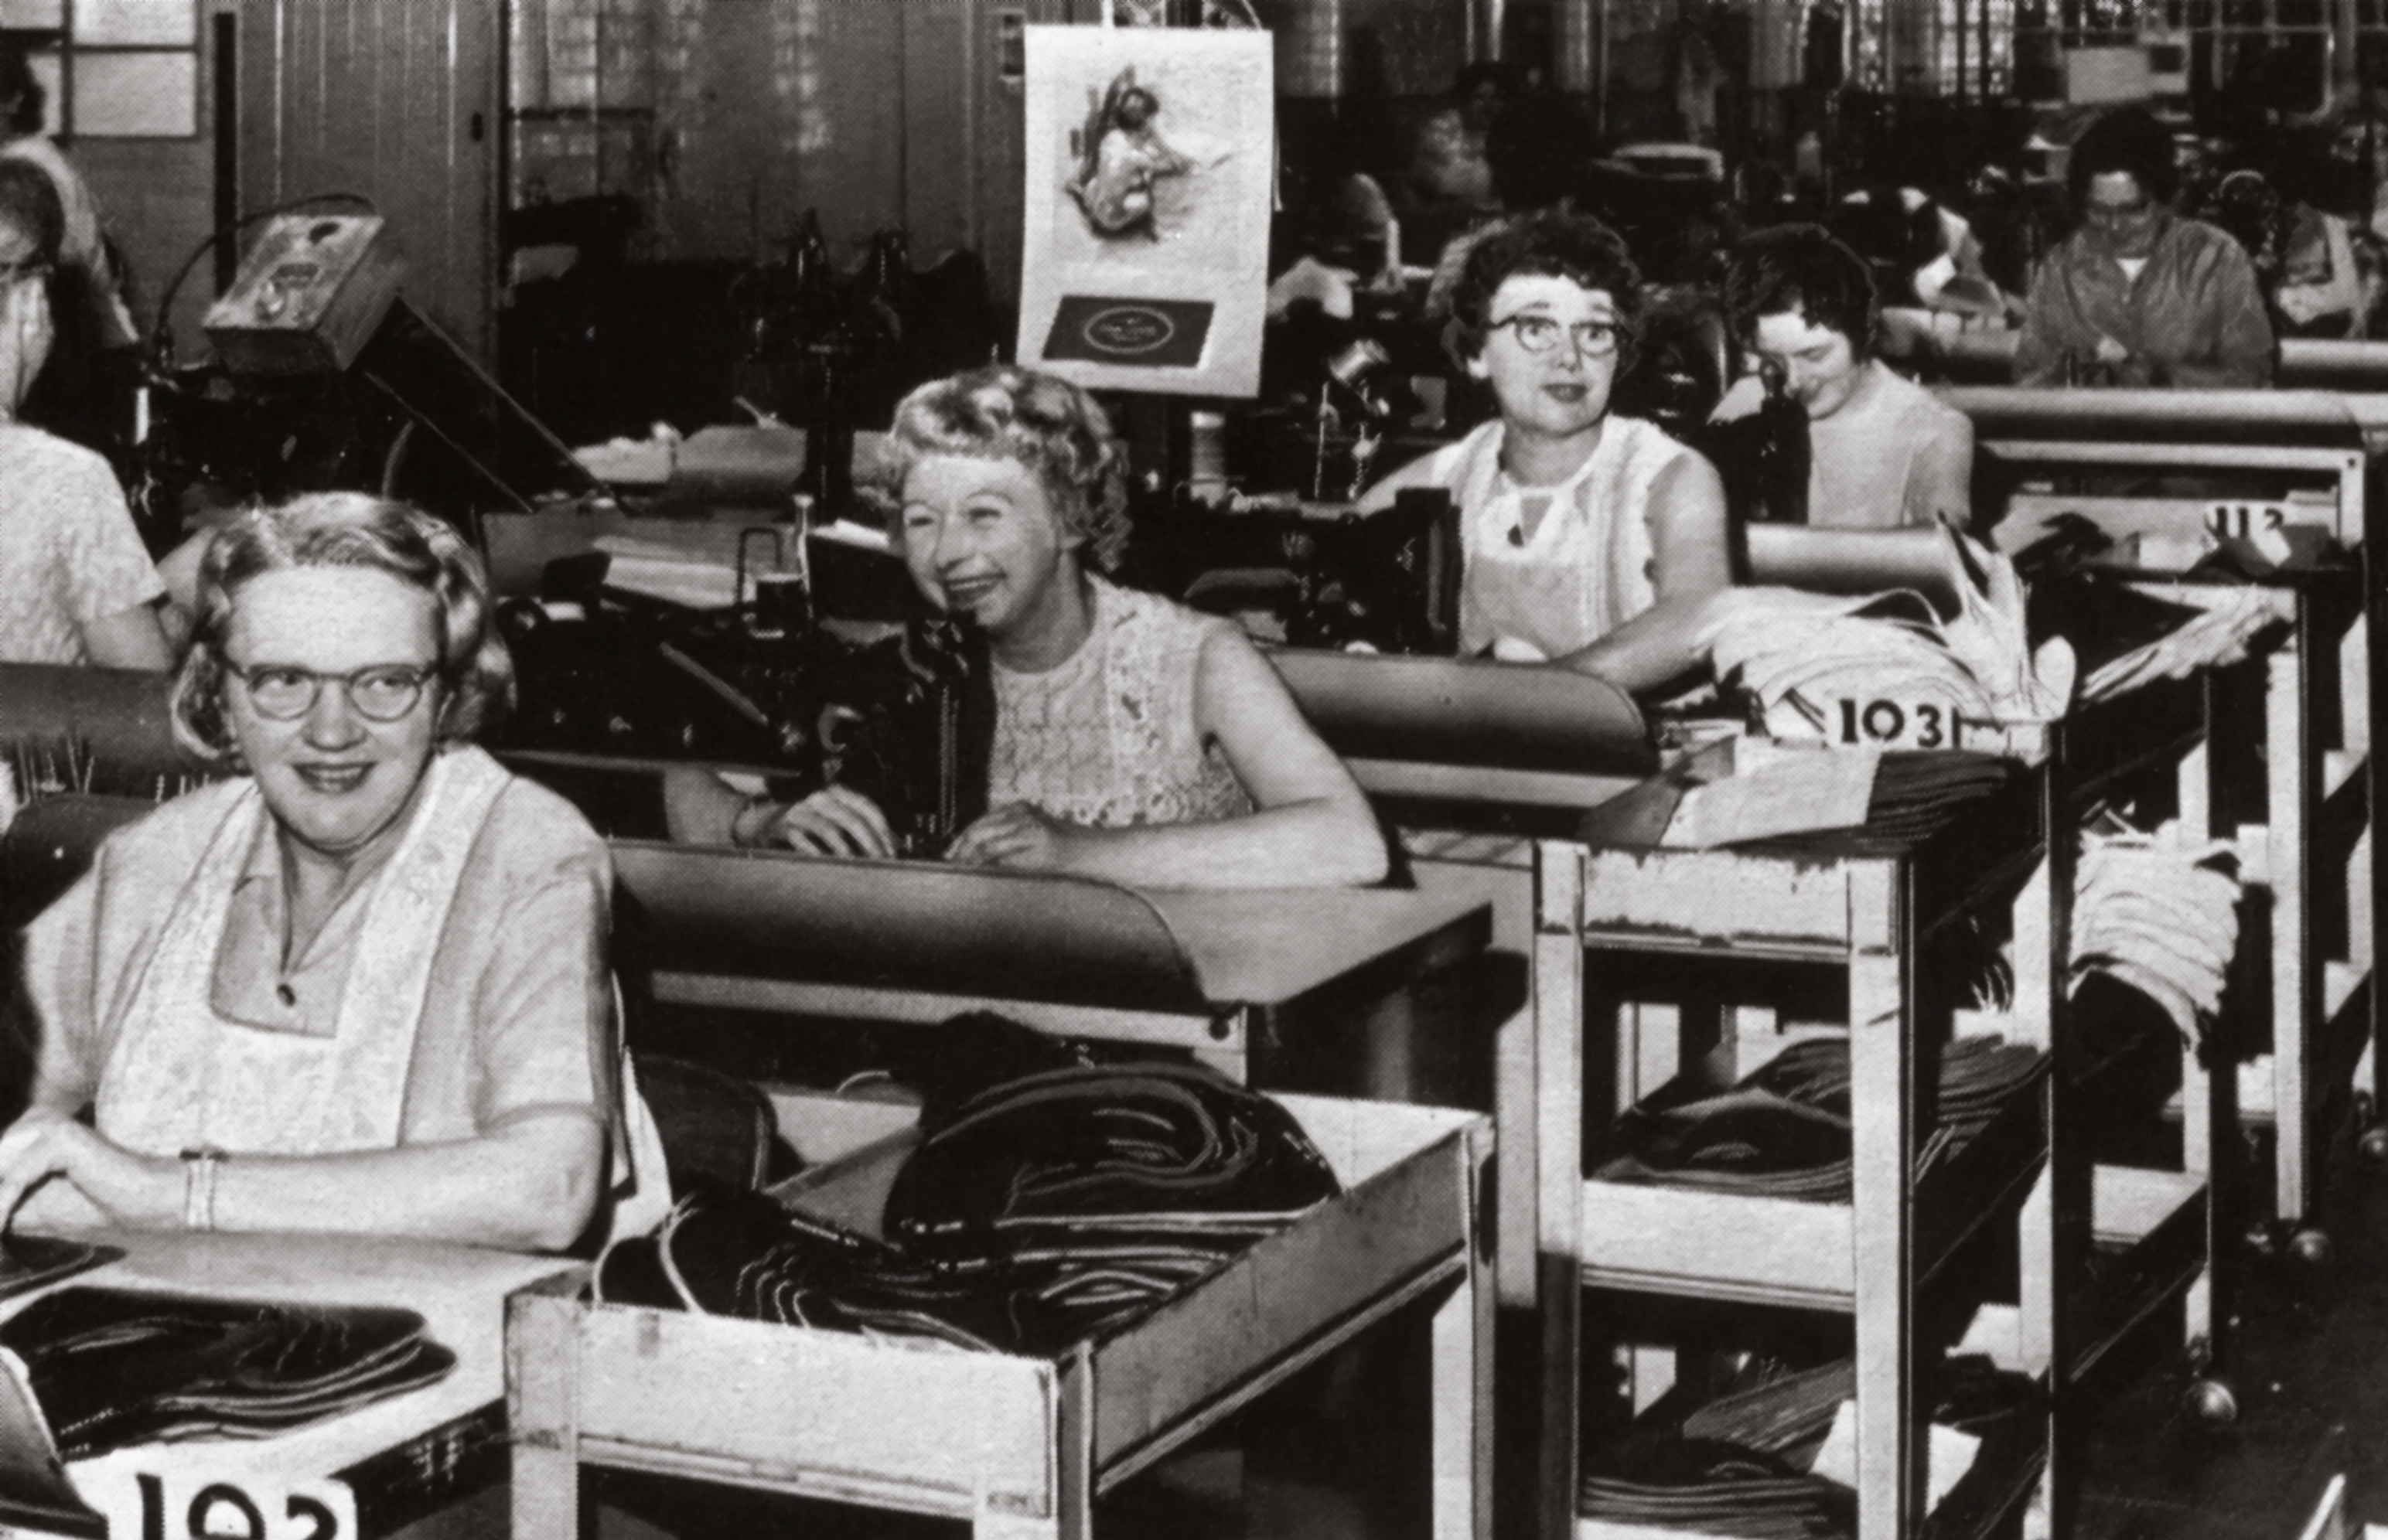 Staff working at sewing machines in Portland Shoe Factory. Image courtesy of the Record Office of Leicester Leicestershire and Rutland